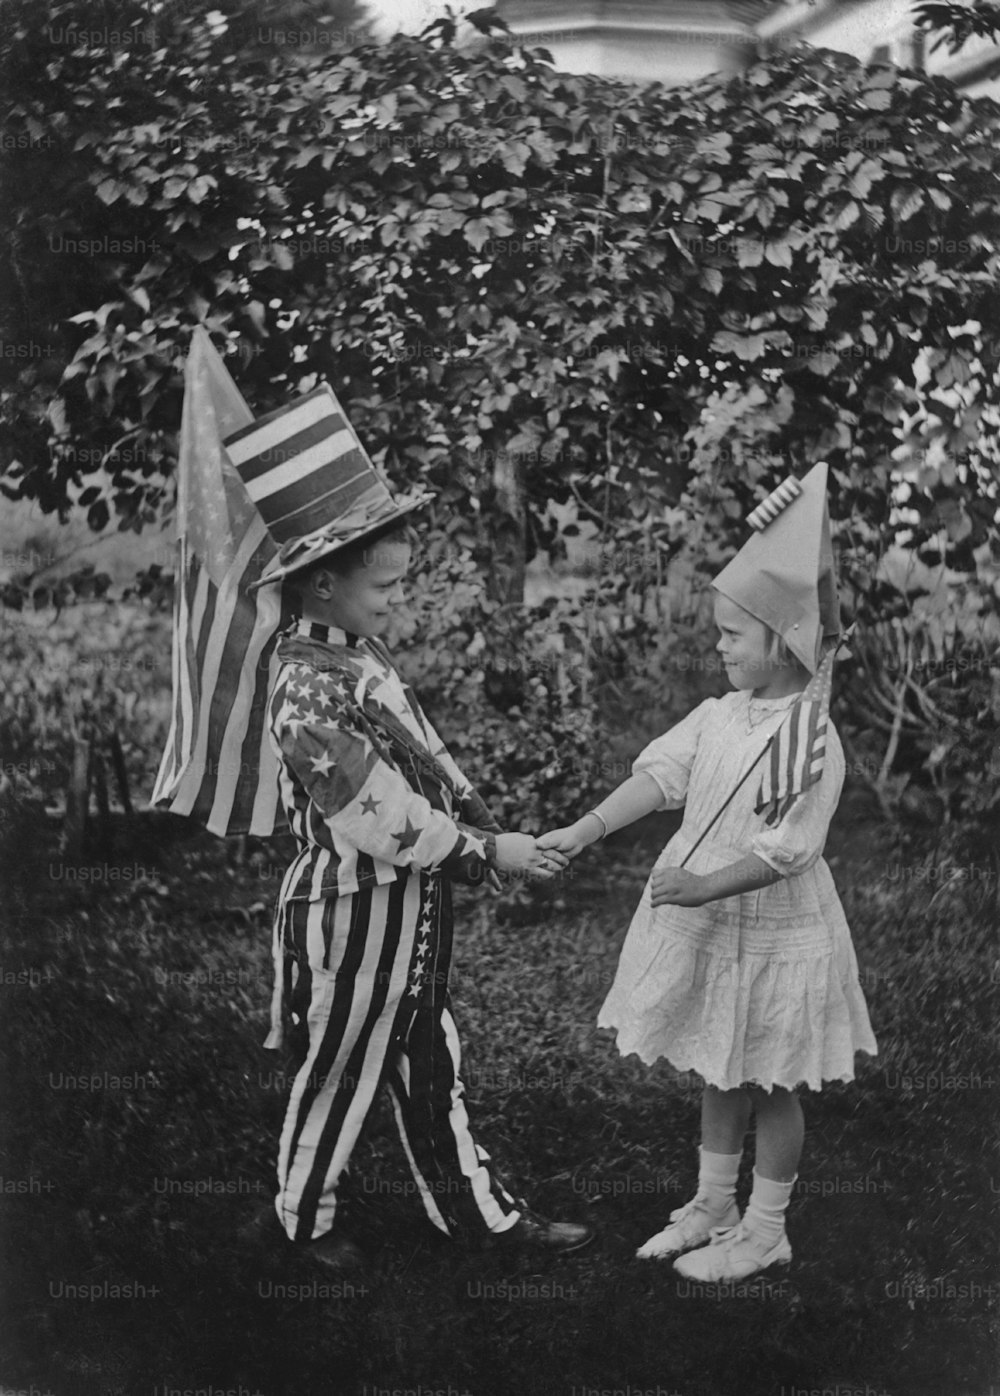 A boy and a girl in patriotic fourth of July costumes, shake hands, circa 1925. (Photo by Paul Thompson/FPG/Archive Photos/Getty Images)